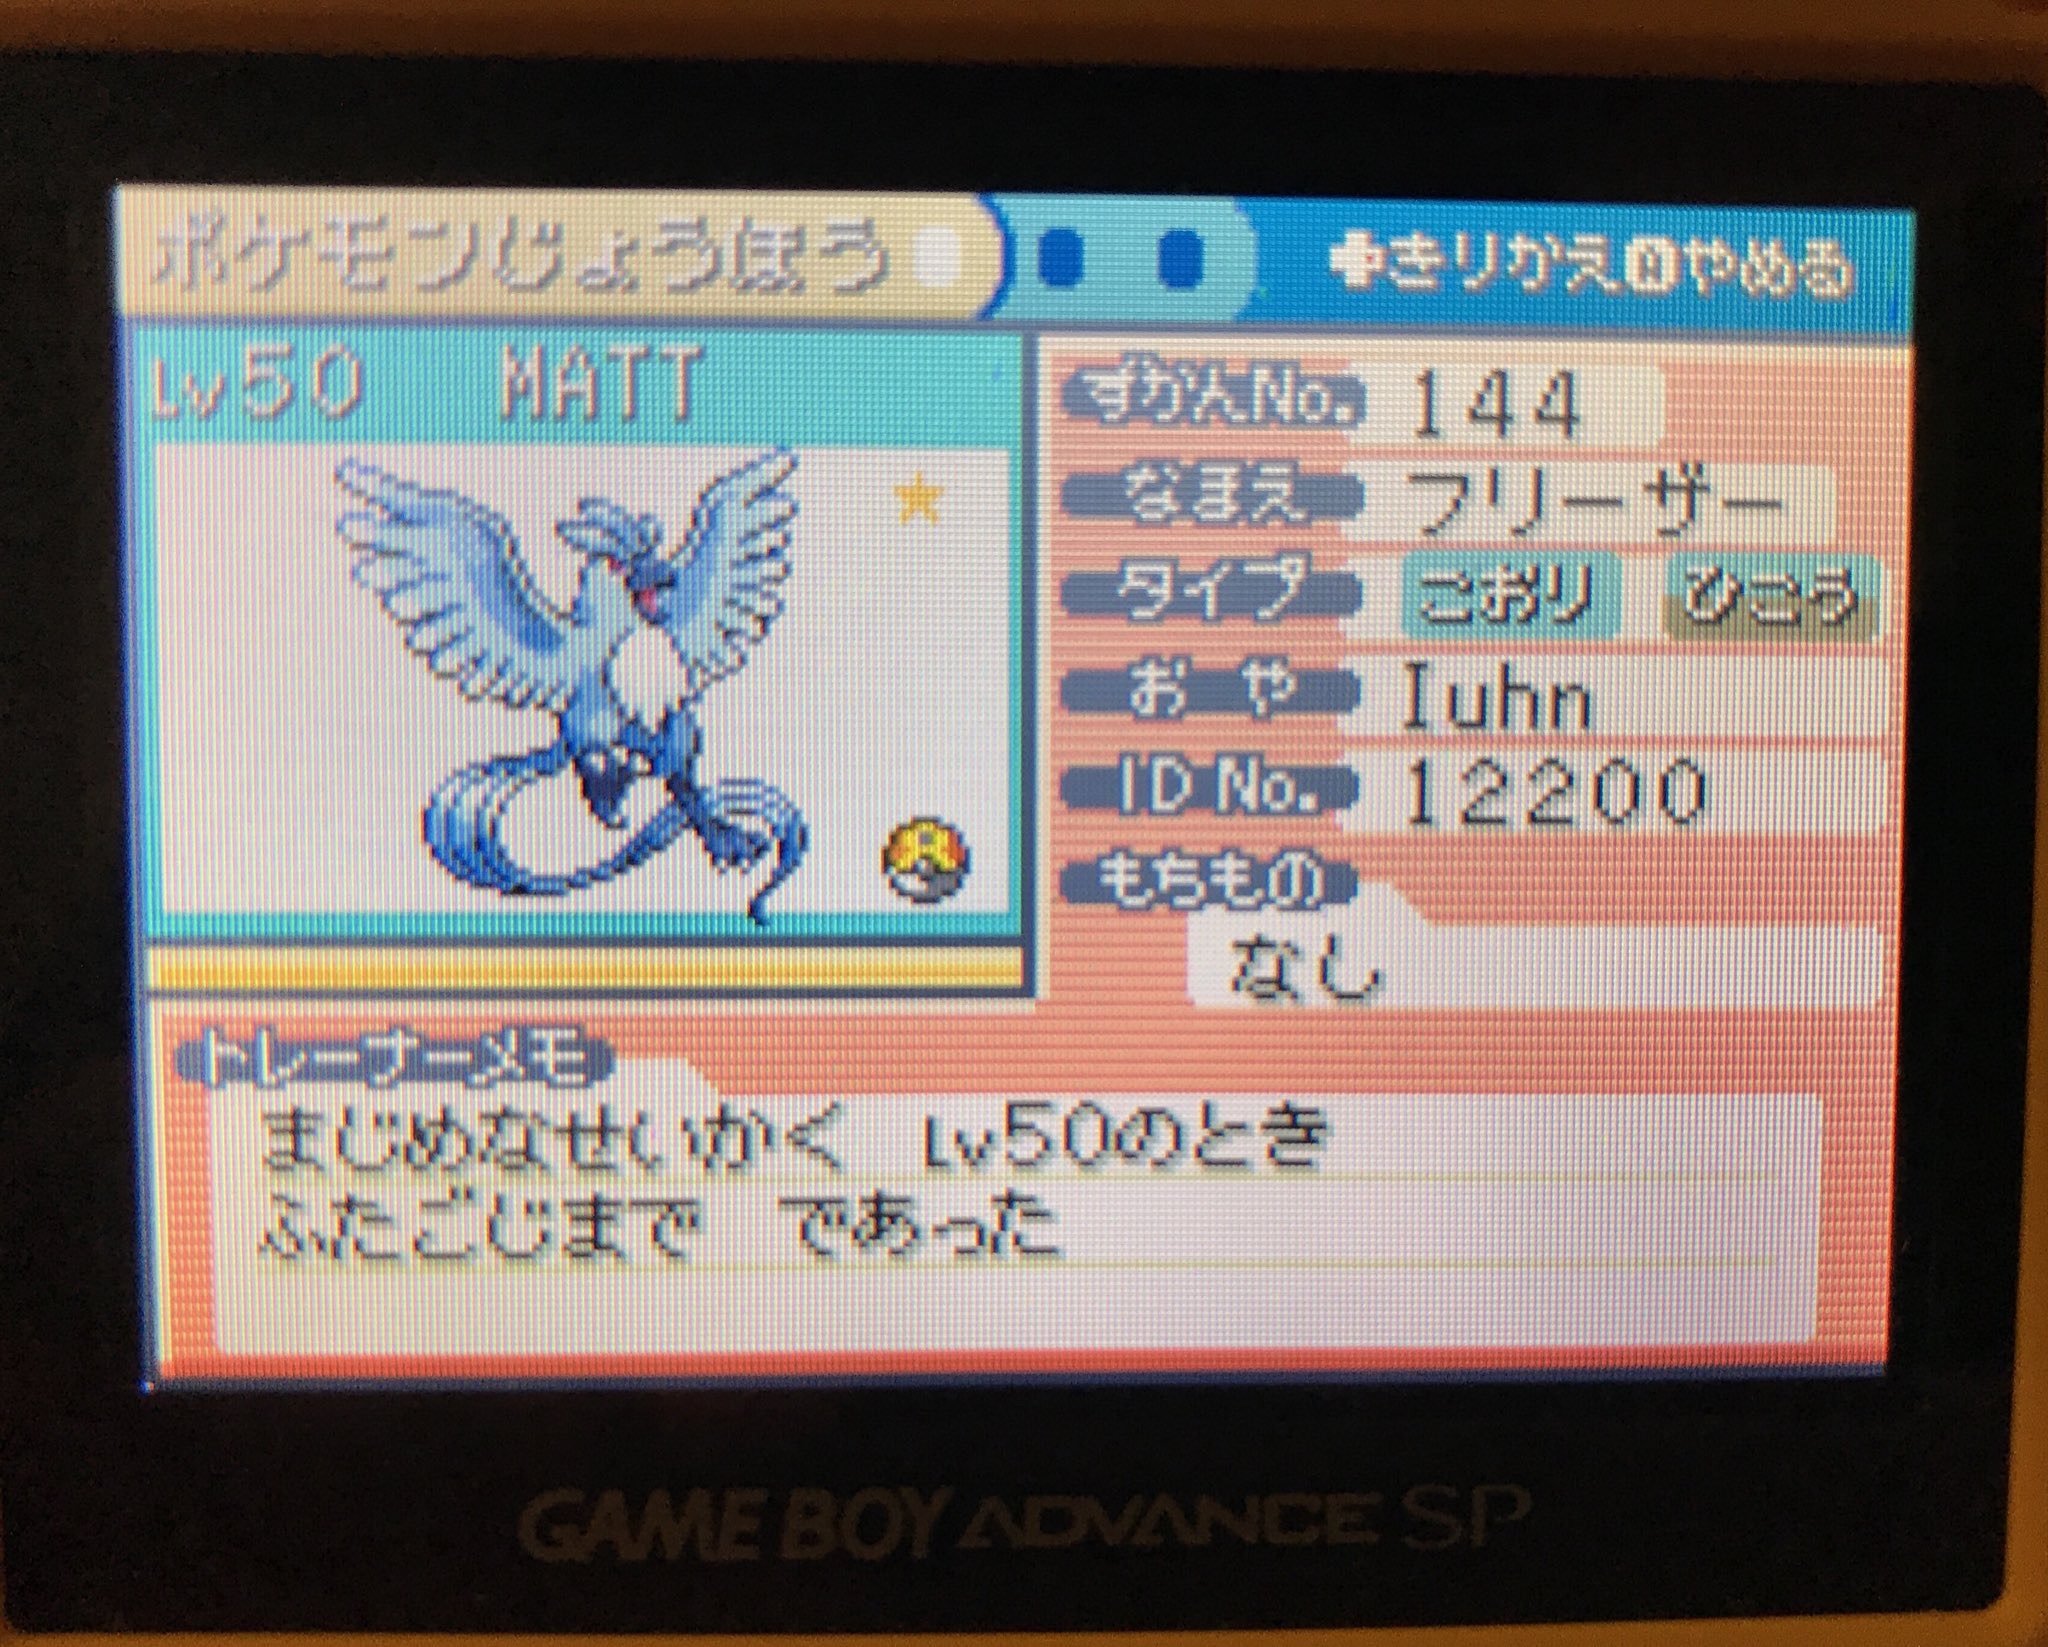 Alph (Tymothy Pole) on X: Just found my 3rd Shiny Articuno in FireRed  after less than 1,000 SRs! This babe looks so amazing, and I managed to  catch it in the first